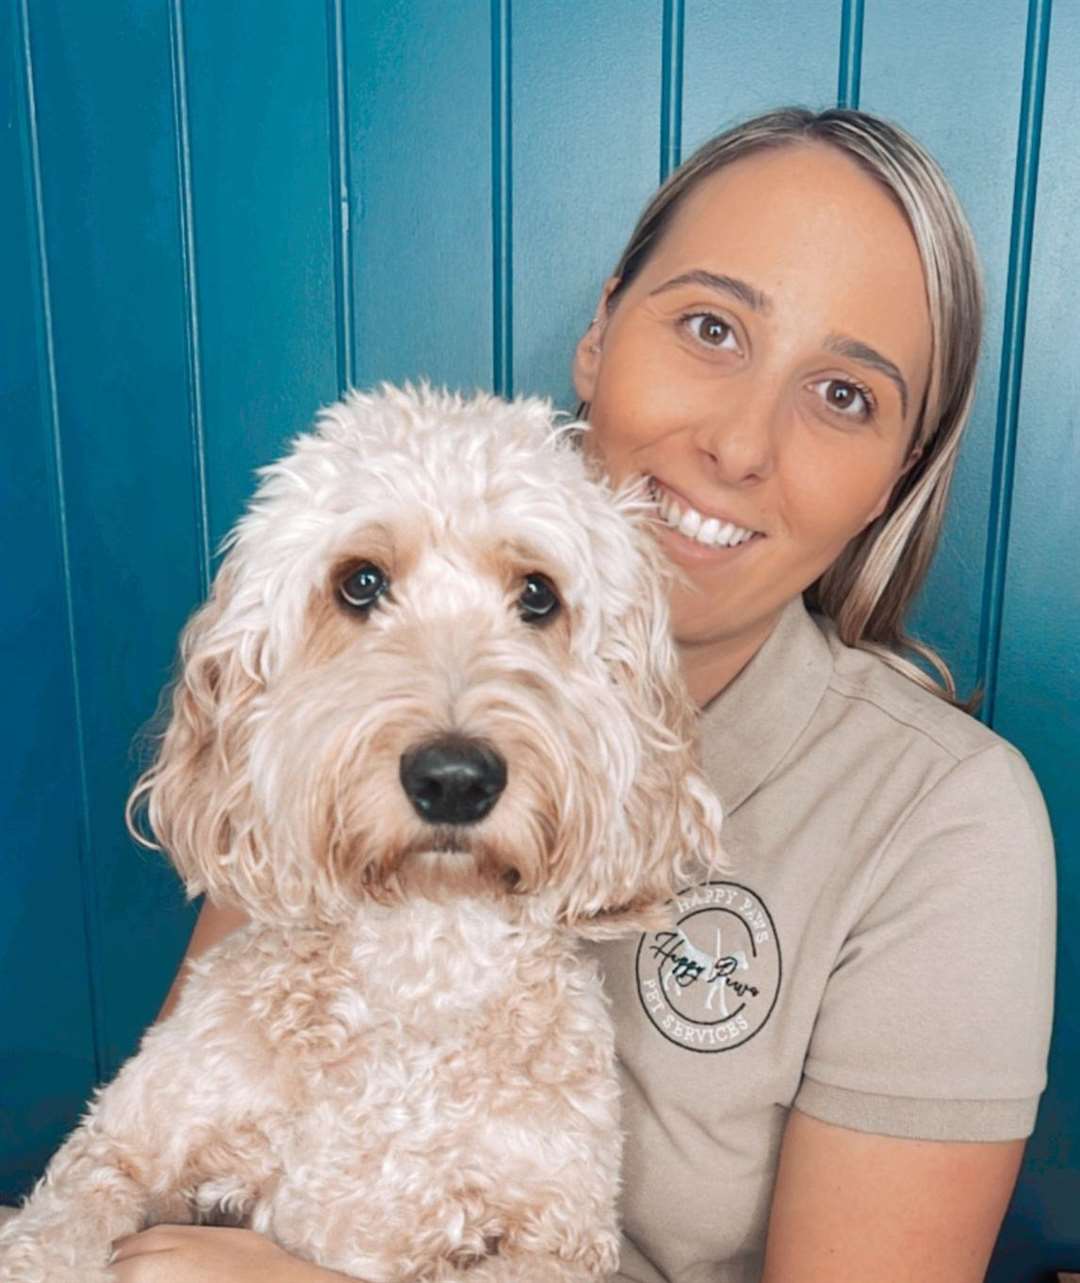 Happy Paws Pet Services owner Tuesday Charlton and her own cockapoo, Daisy